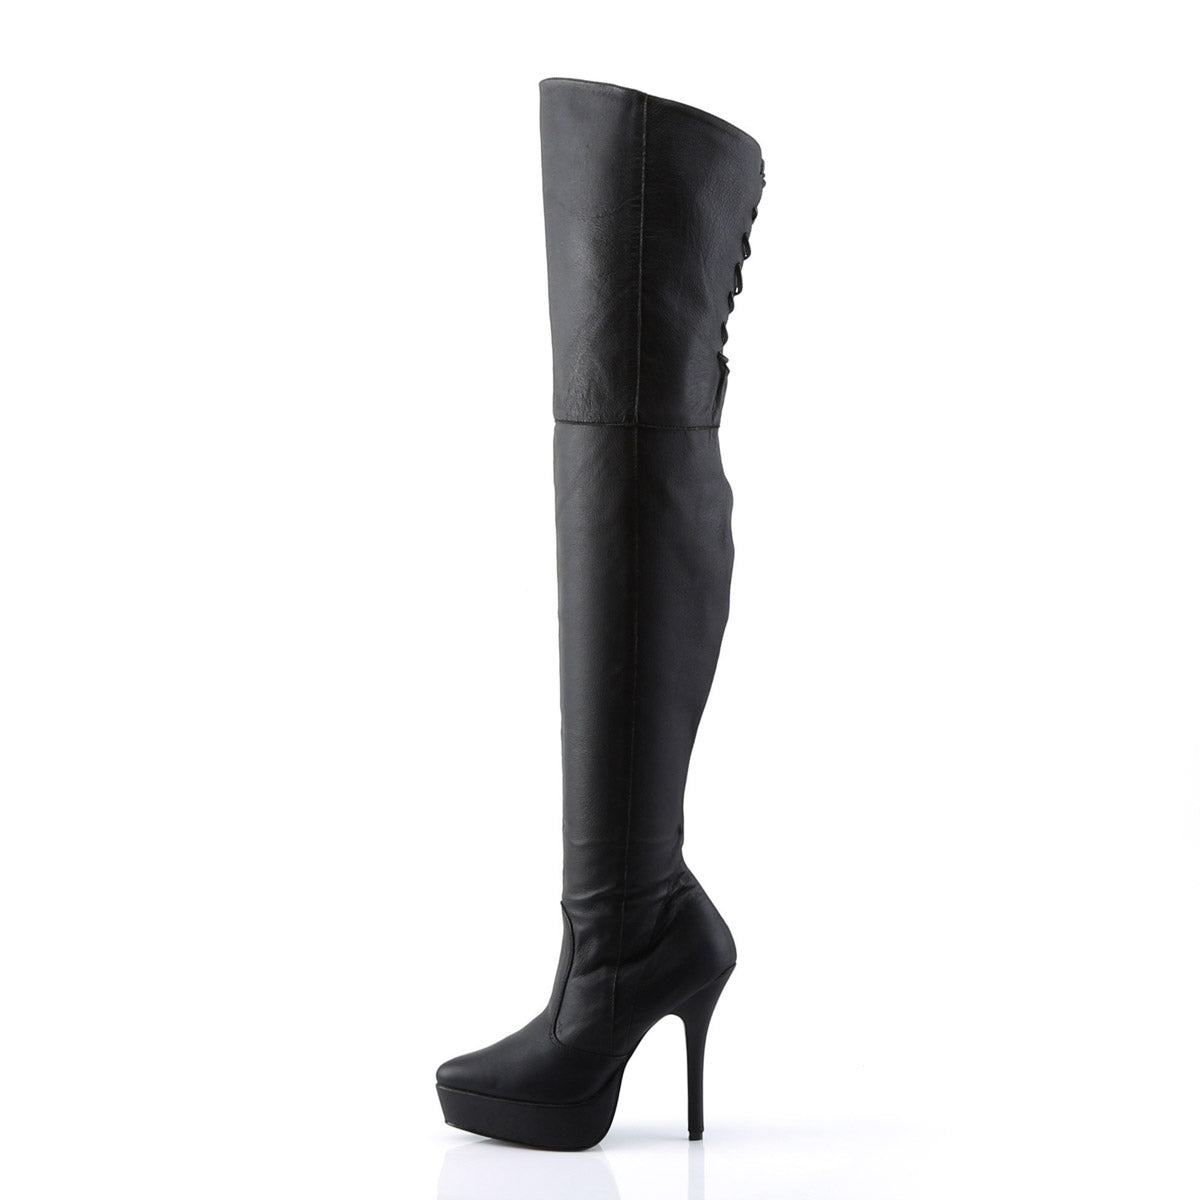 Sexy Side Zip Thigh High Lace Up Back Platform Stiletto Boots Shoes Pleaser Devious INDULGE/3011